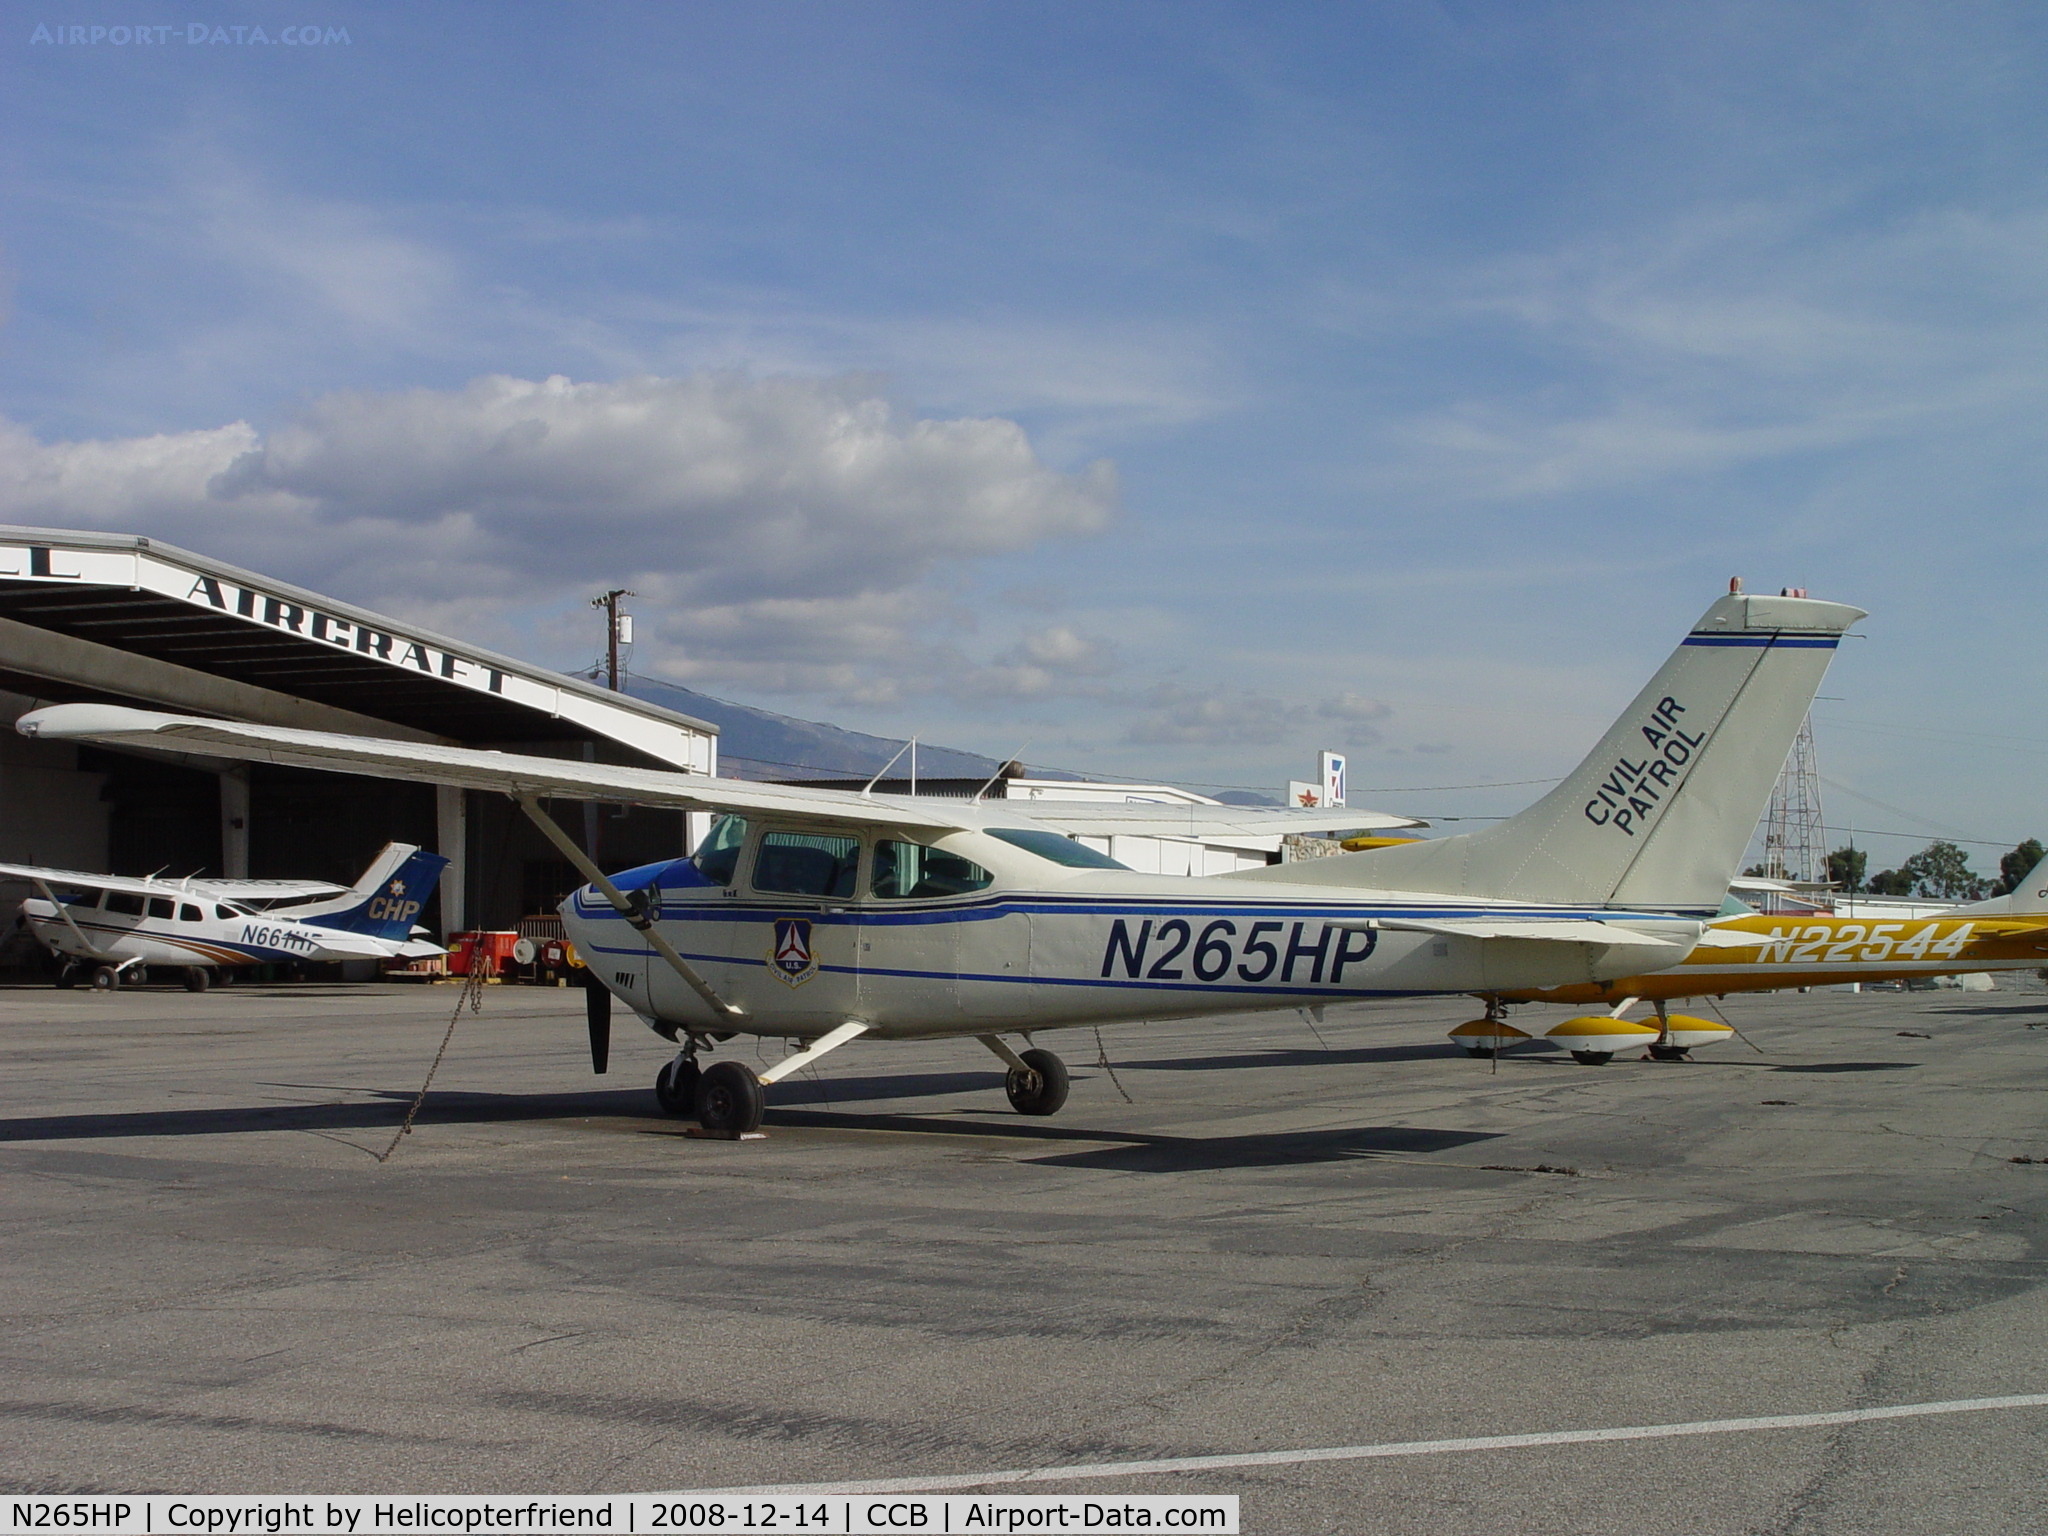 N265HP, 1985 Cessna 182 Skylane C/N 18268519, In line waiting to be checked at Cable